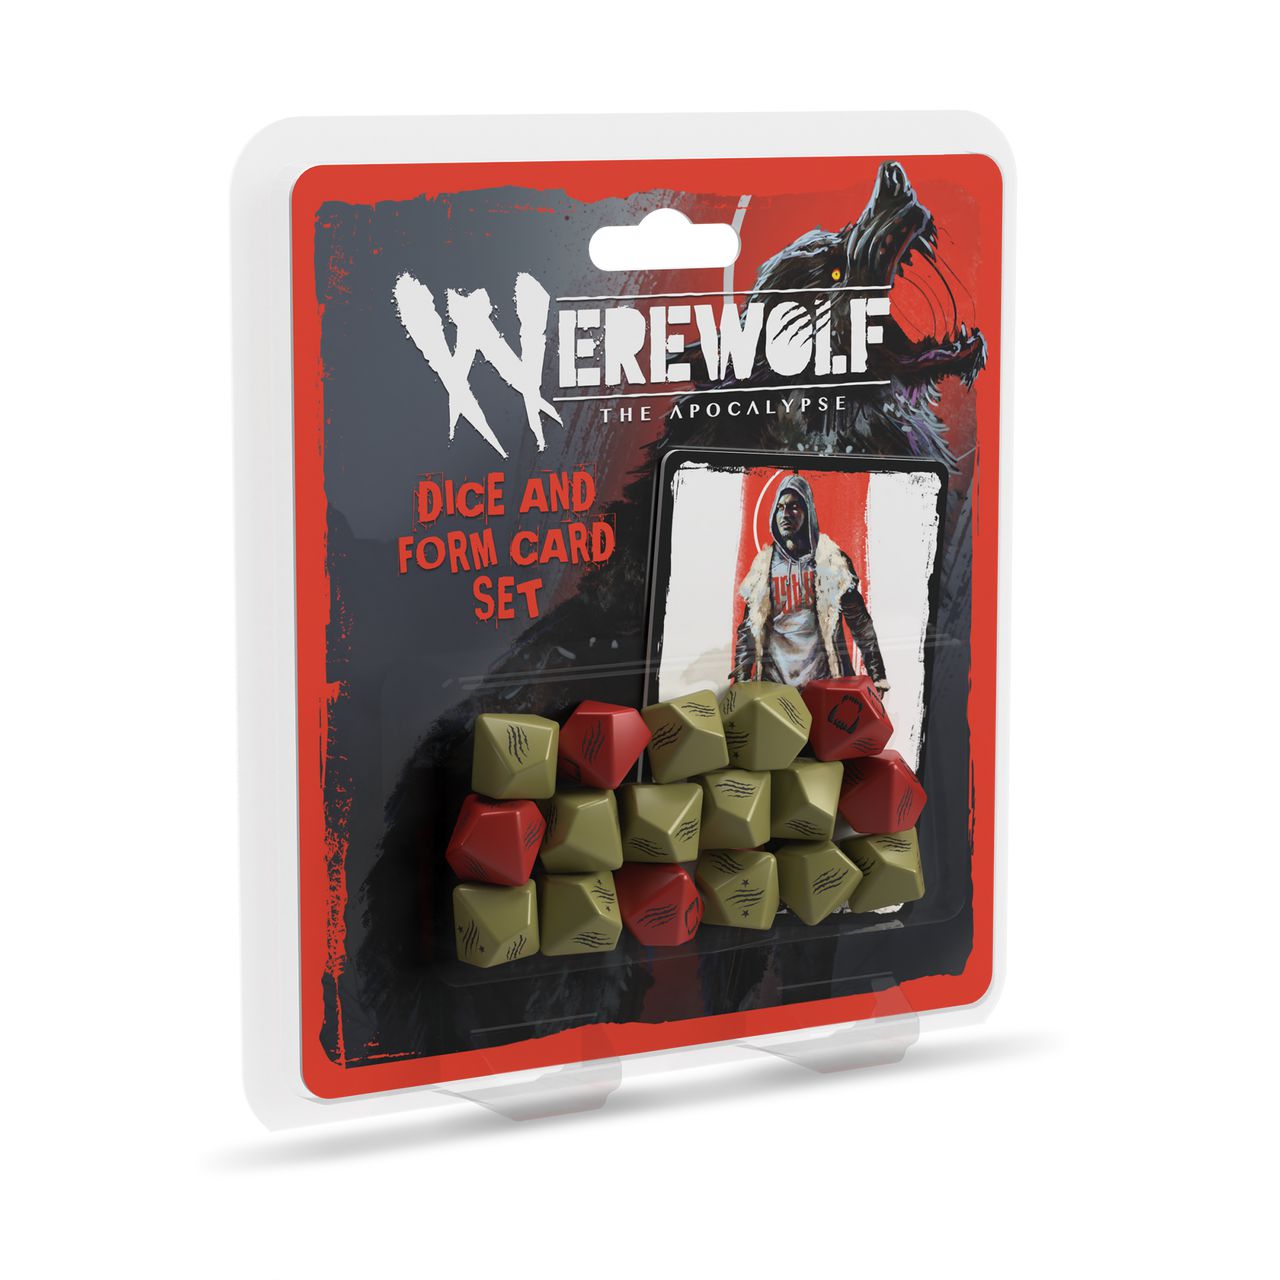 Werewolf: The Apocalypse 5th Edition Game Dice and Form Card Set